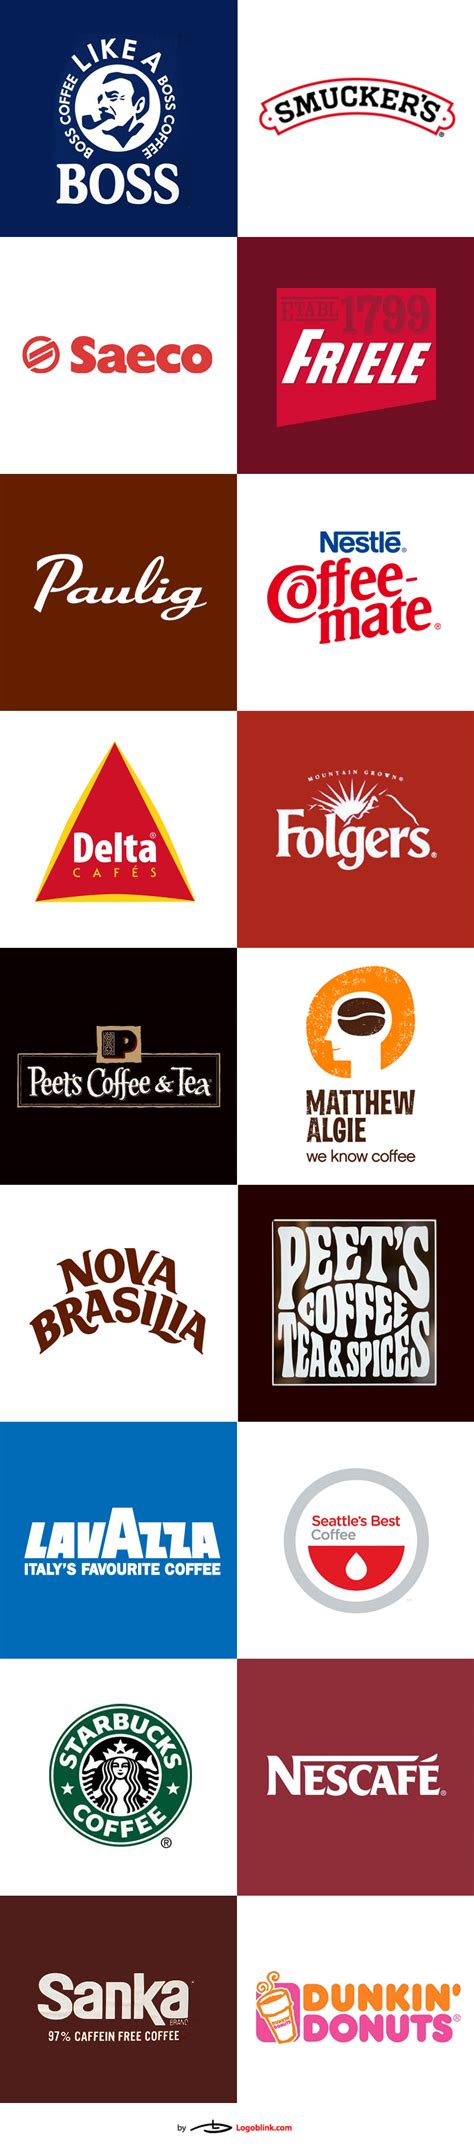 Coffee is the new trend of the. 36 Famous coffee logos from around the world. | Кофе